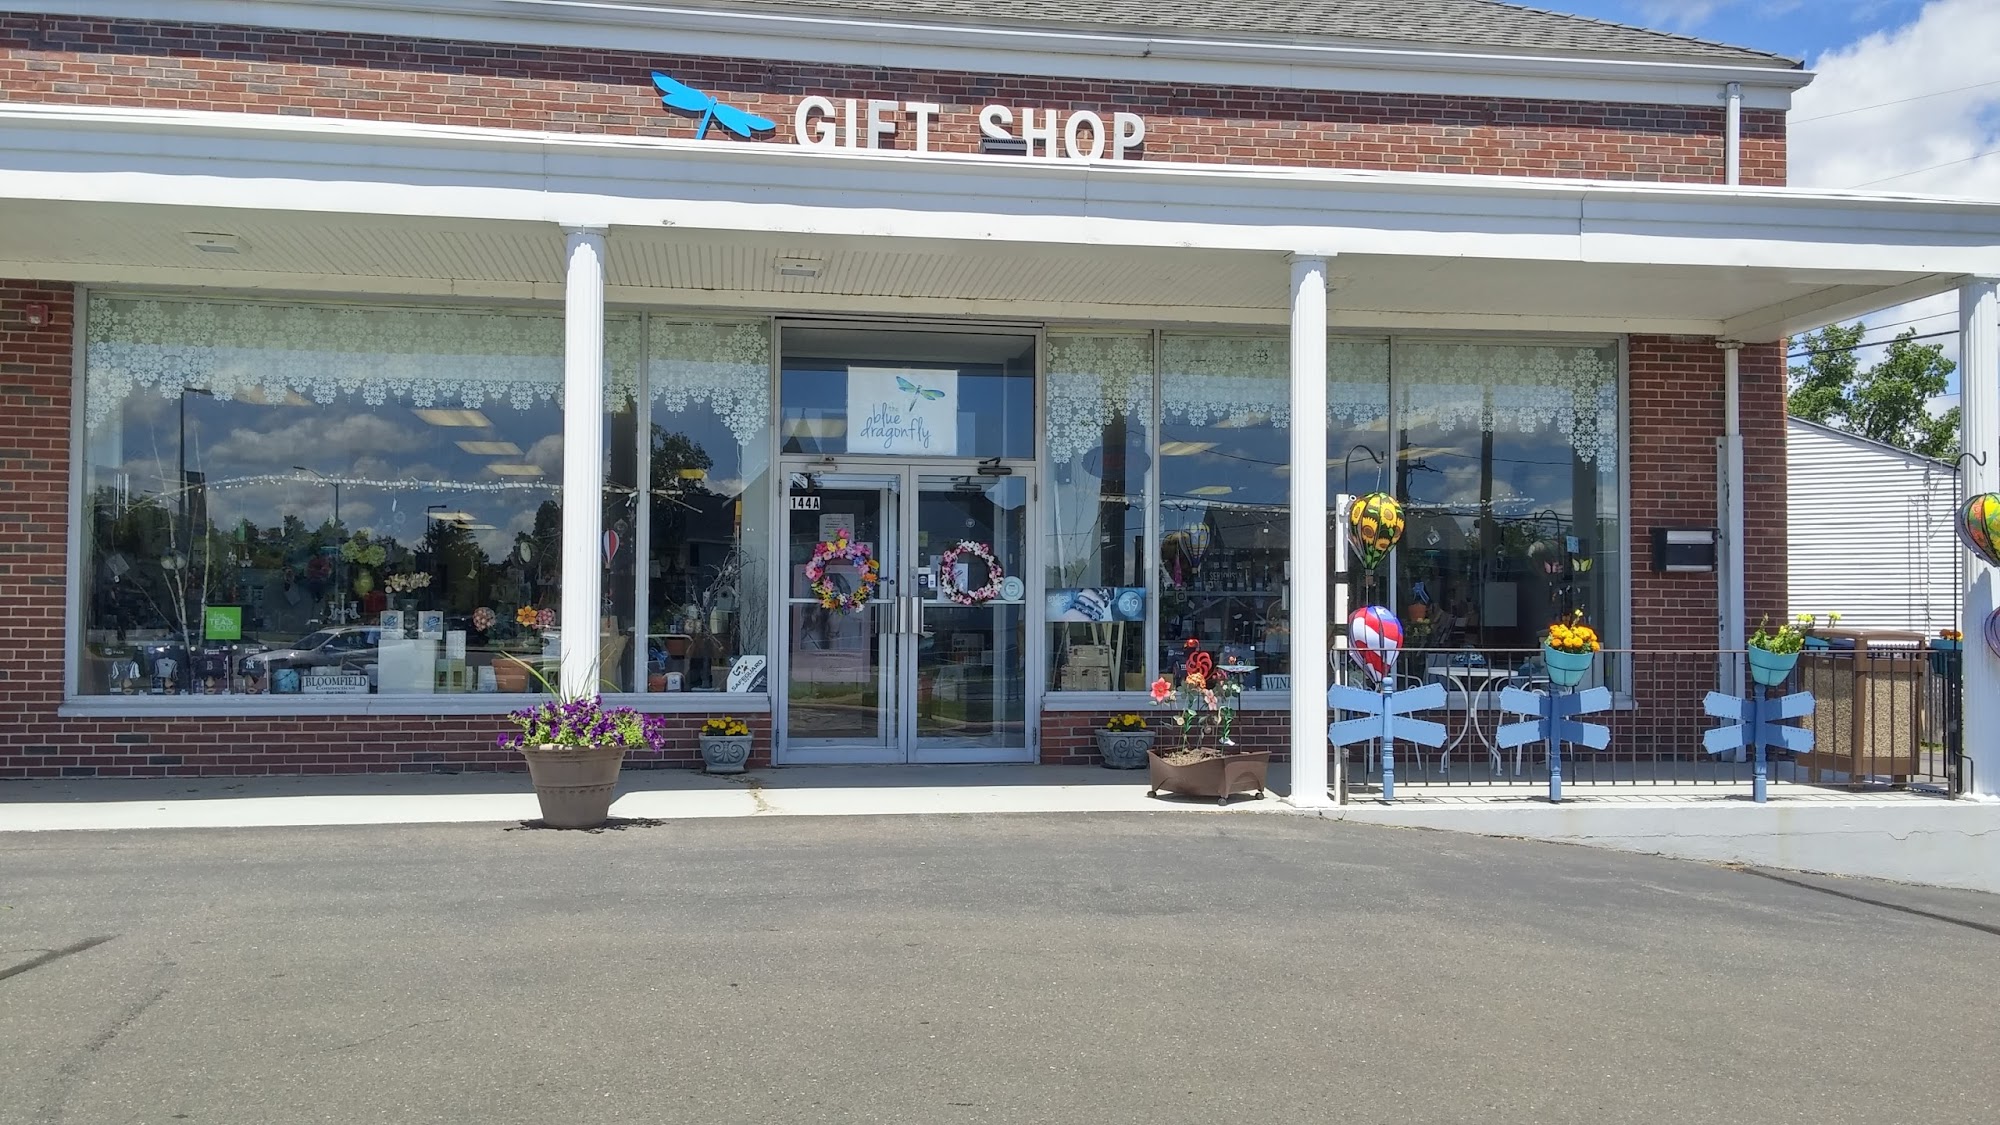 The Blue Dragonfly Gift Shop